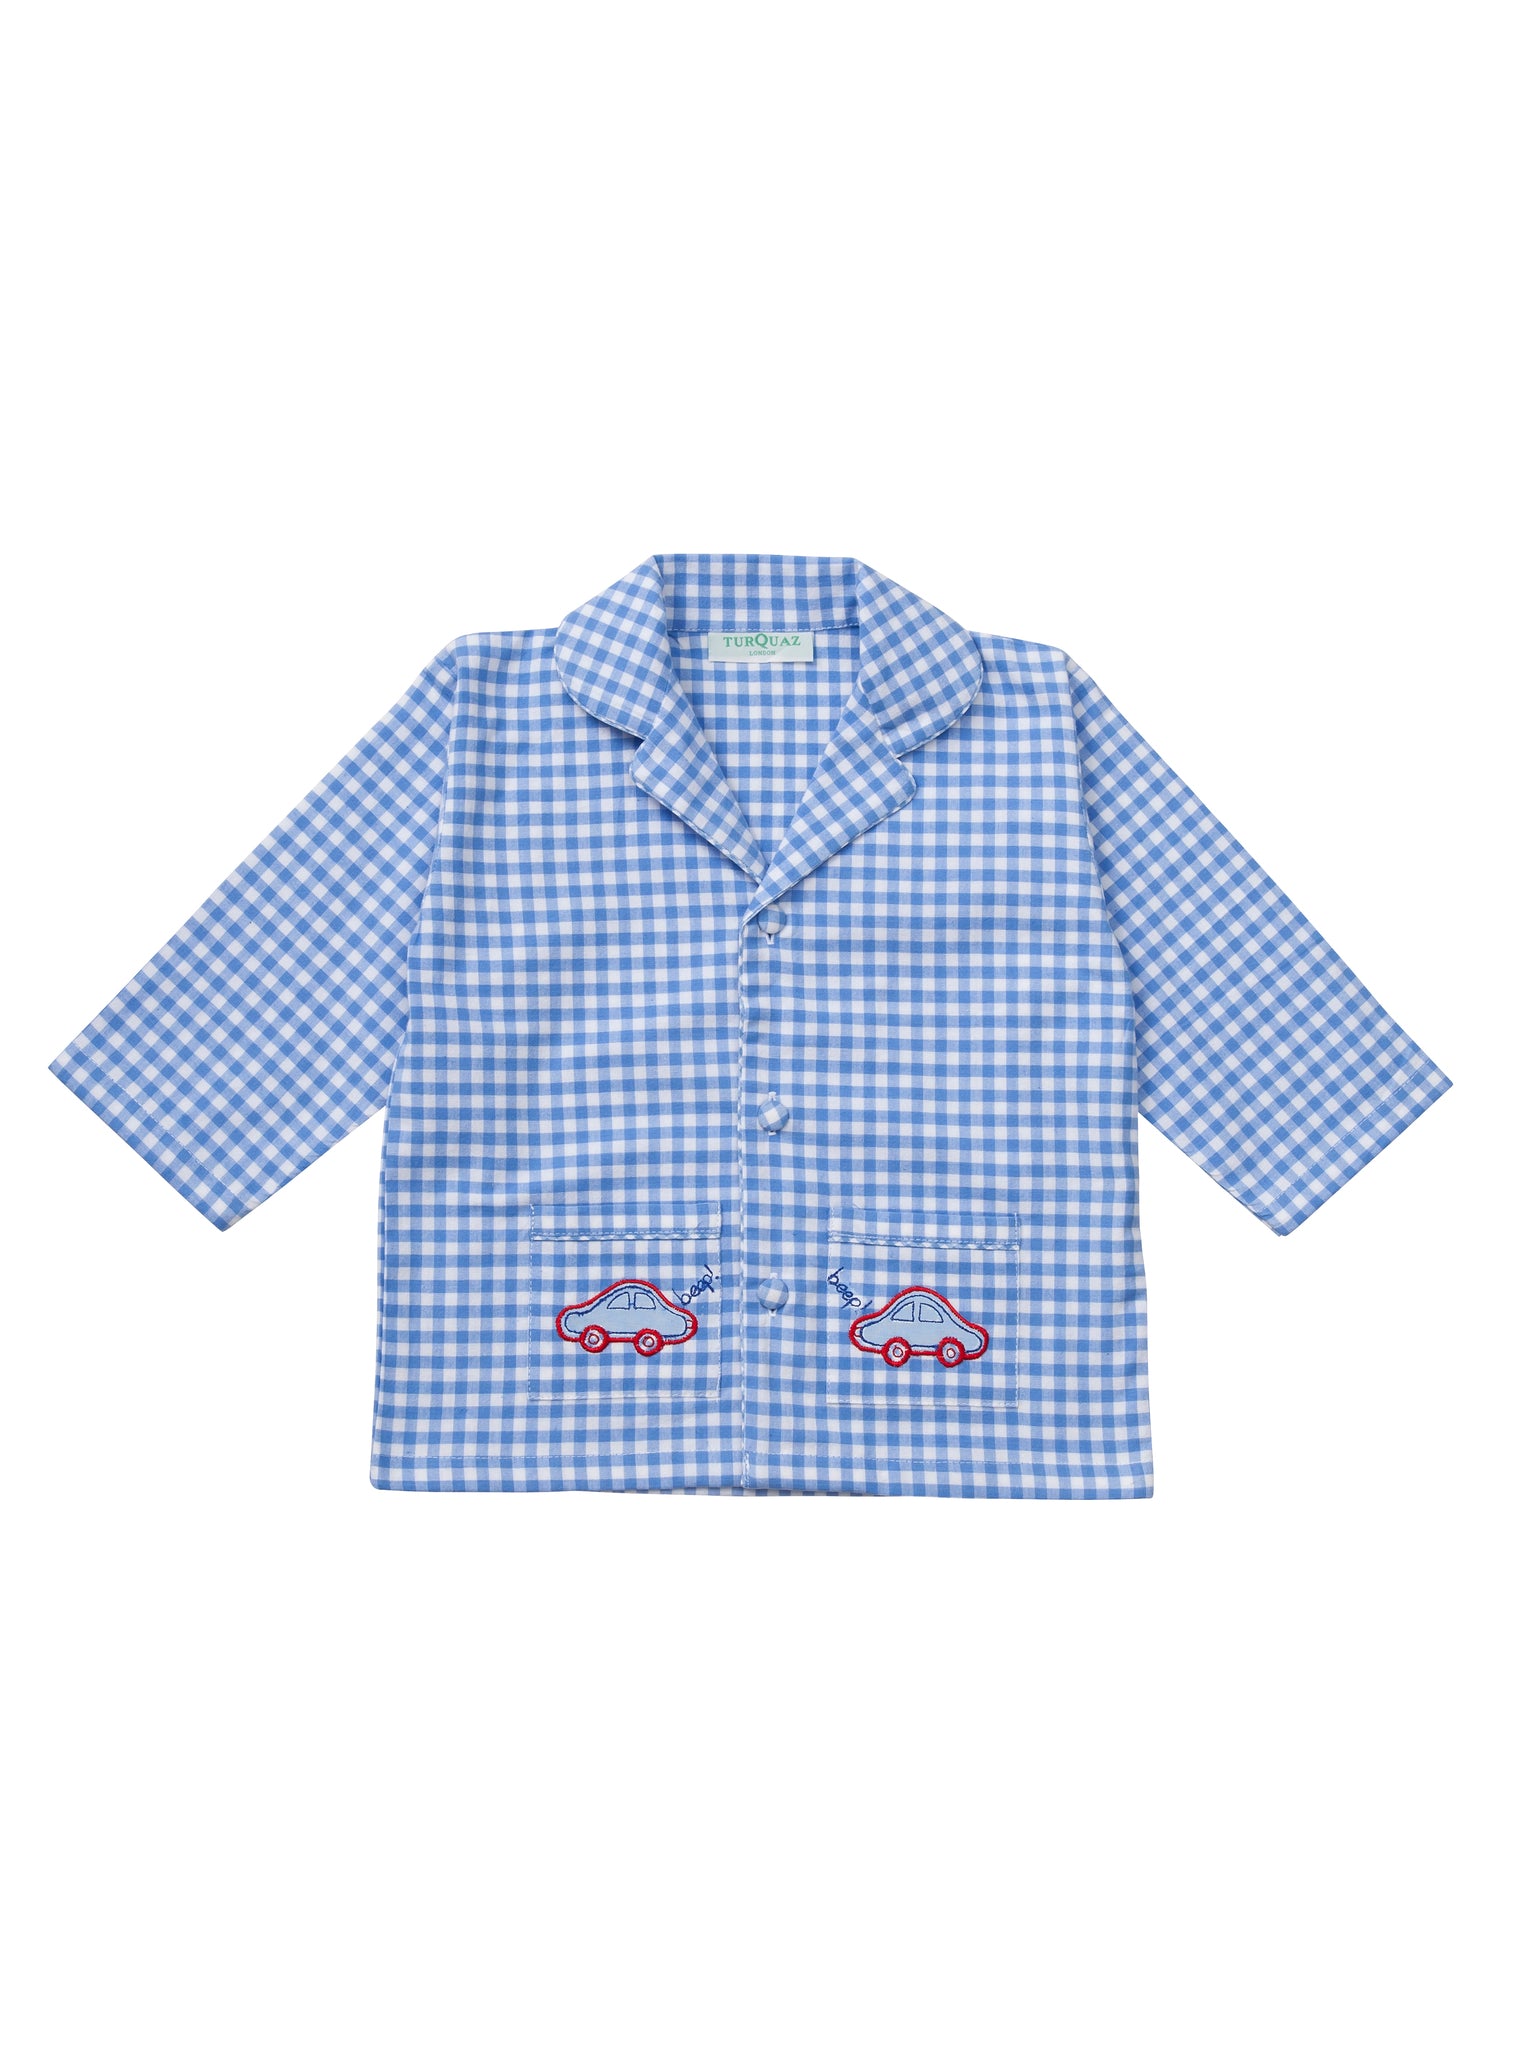 Classic red gingham children's cotton pyjamas with car motif. Top front. From Turquaz. 